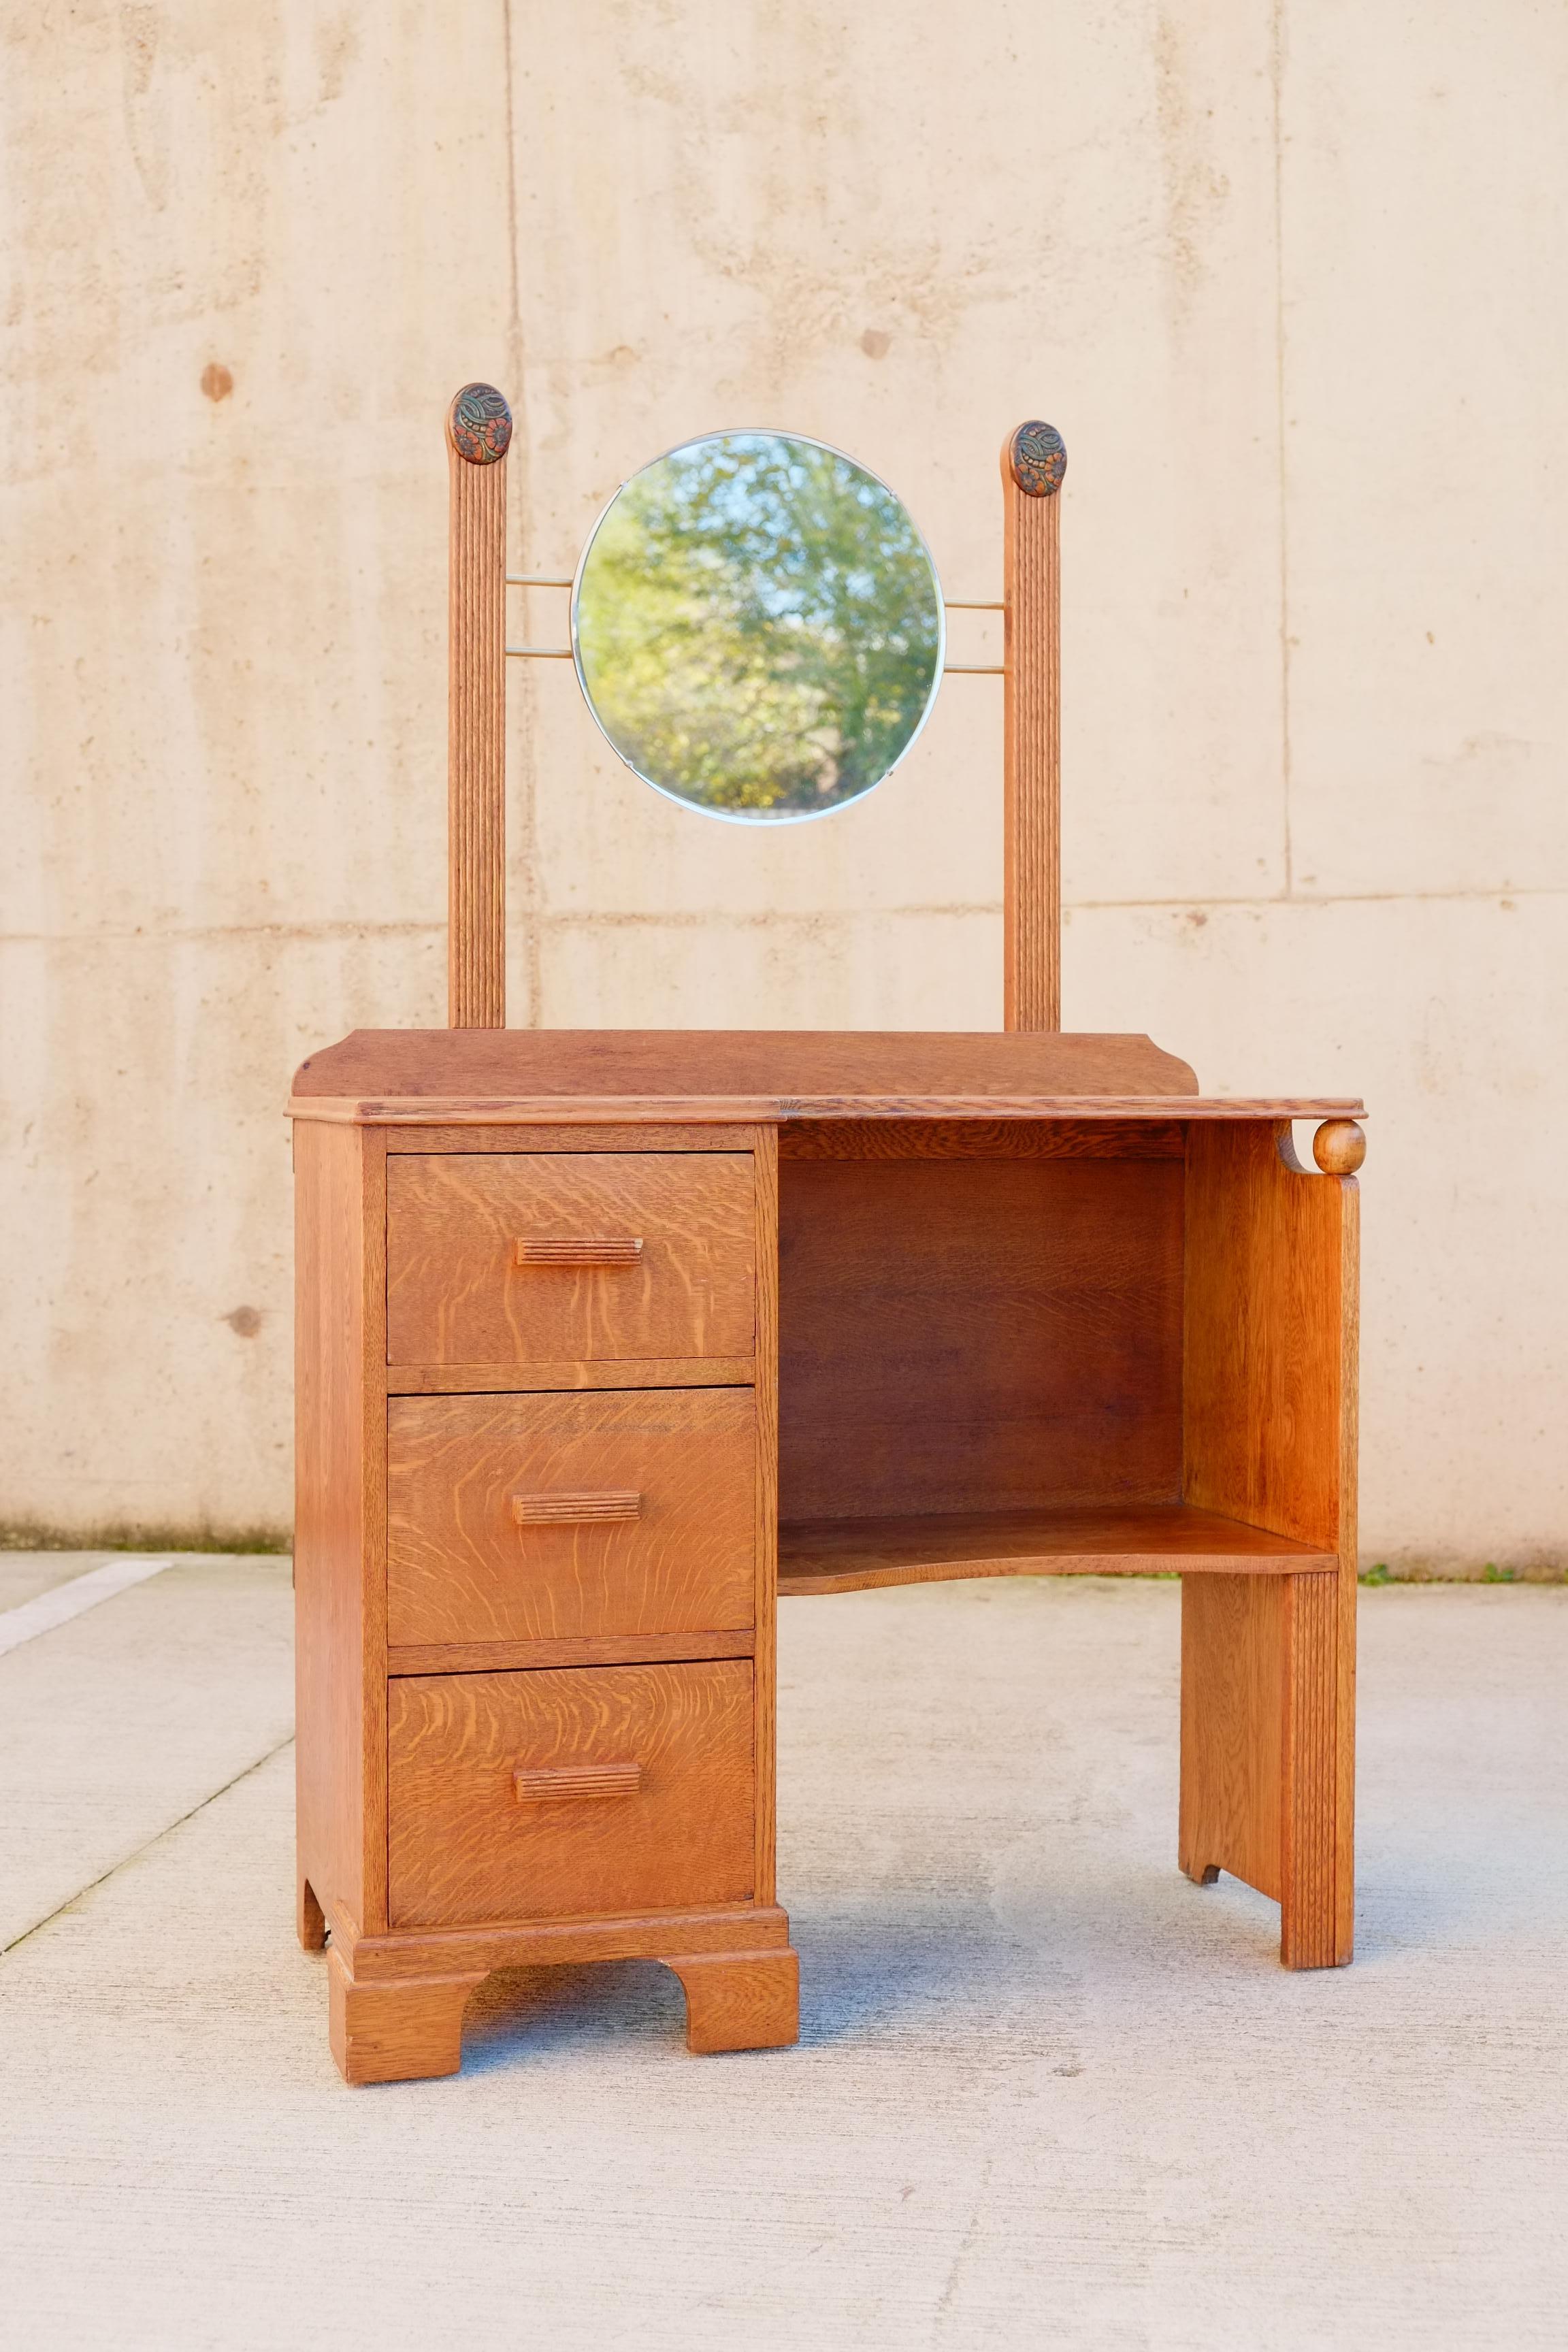 A beautiful 1930s Art Nouveau dressing table from England. This vanity has three deep drawers to the left side with an open seating space and shelf to the right. The vanity is made of solid oak with the most beautiful reeded and hand carved details.